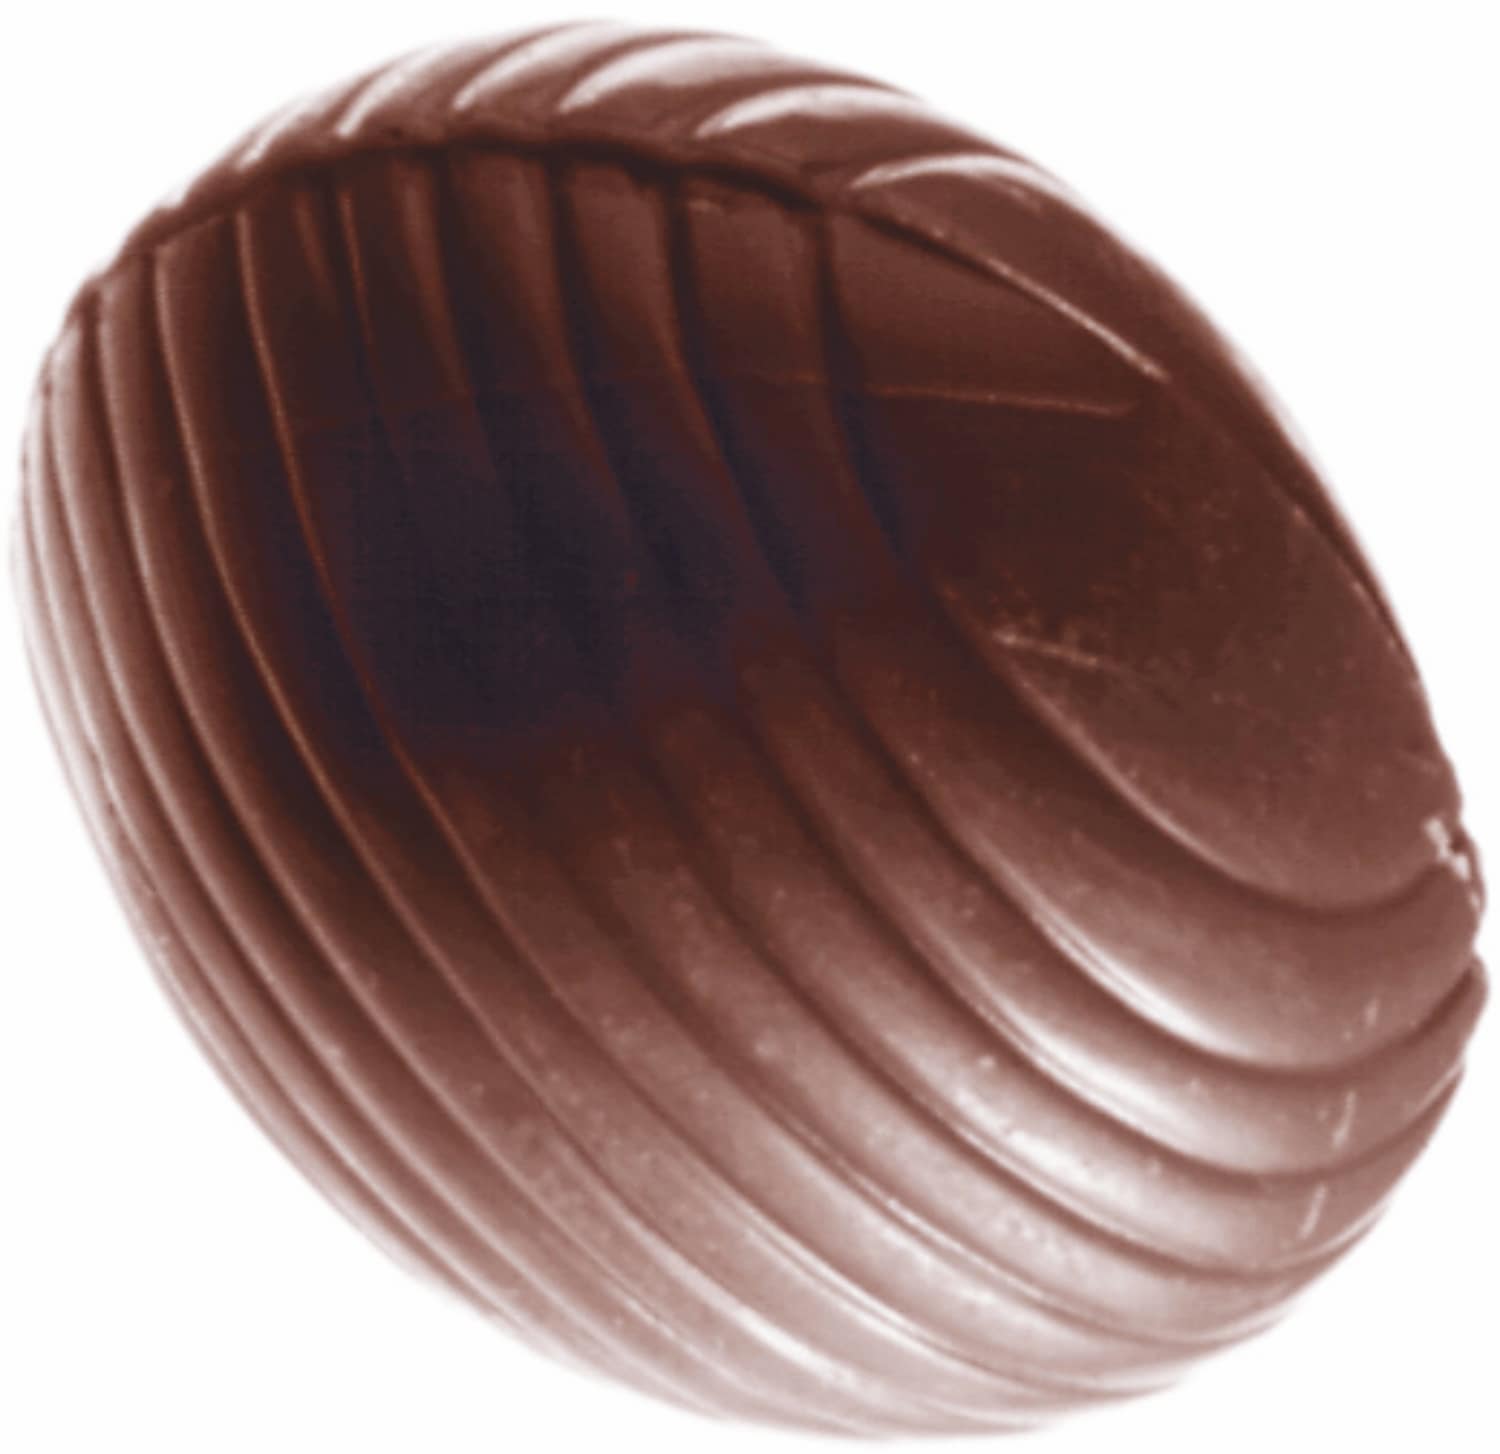 Chocolate mould "Easter egg" 421358